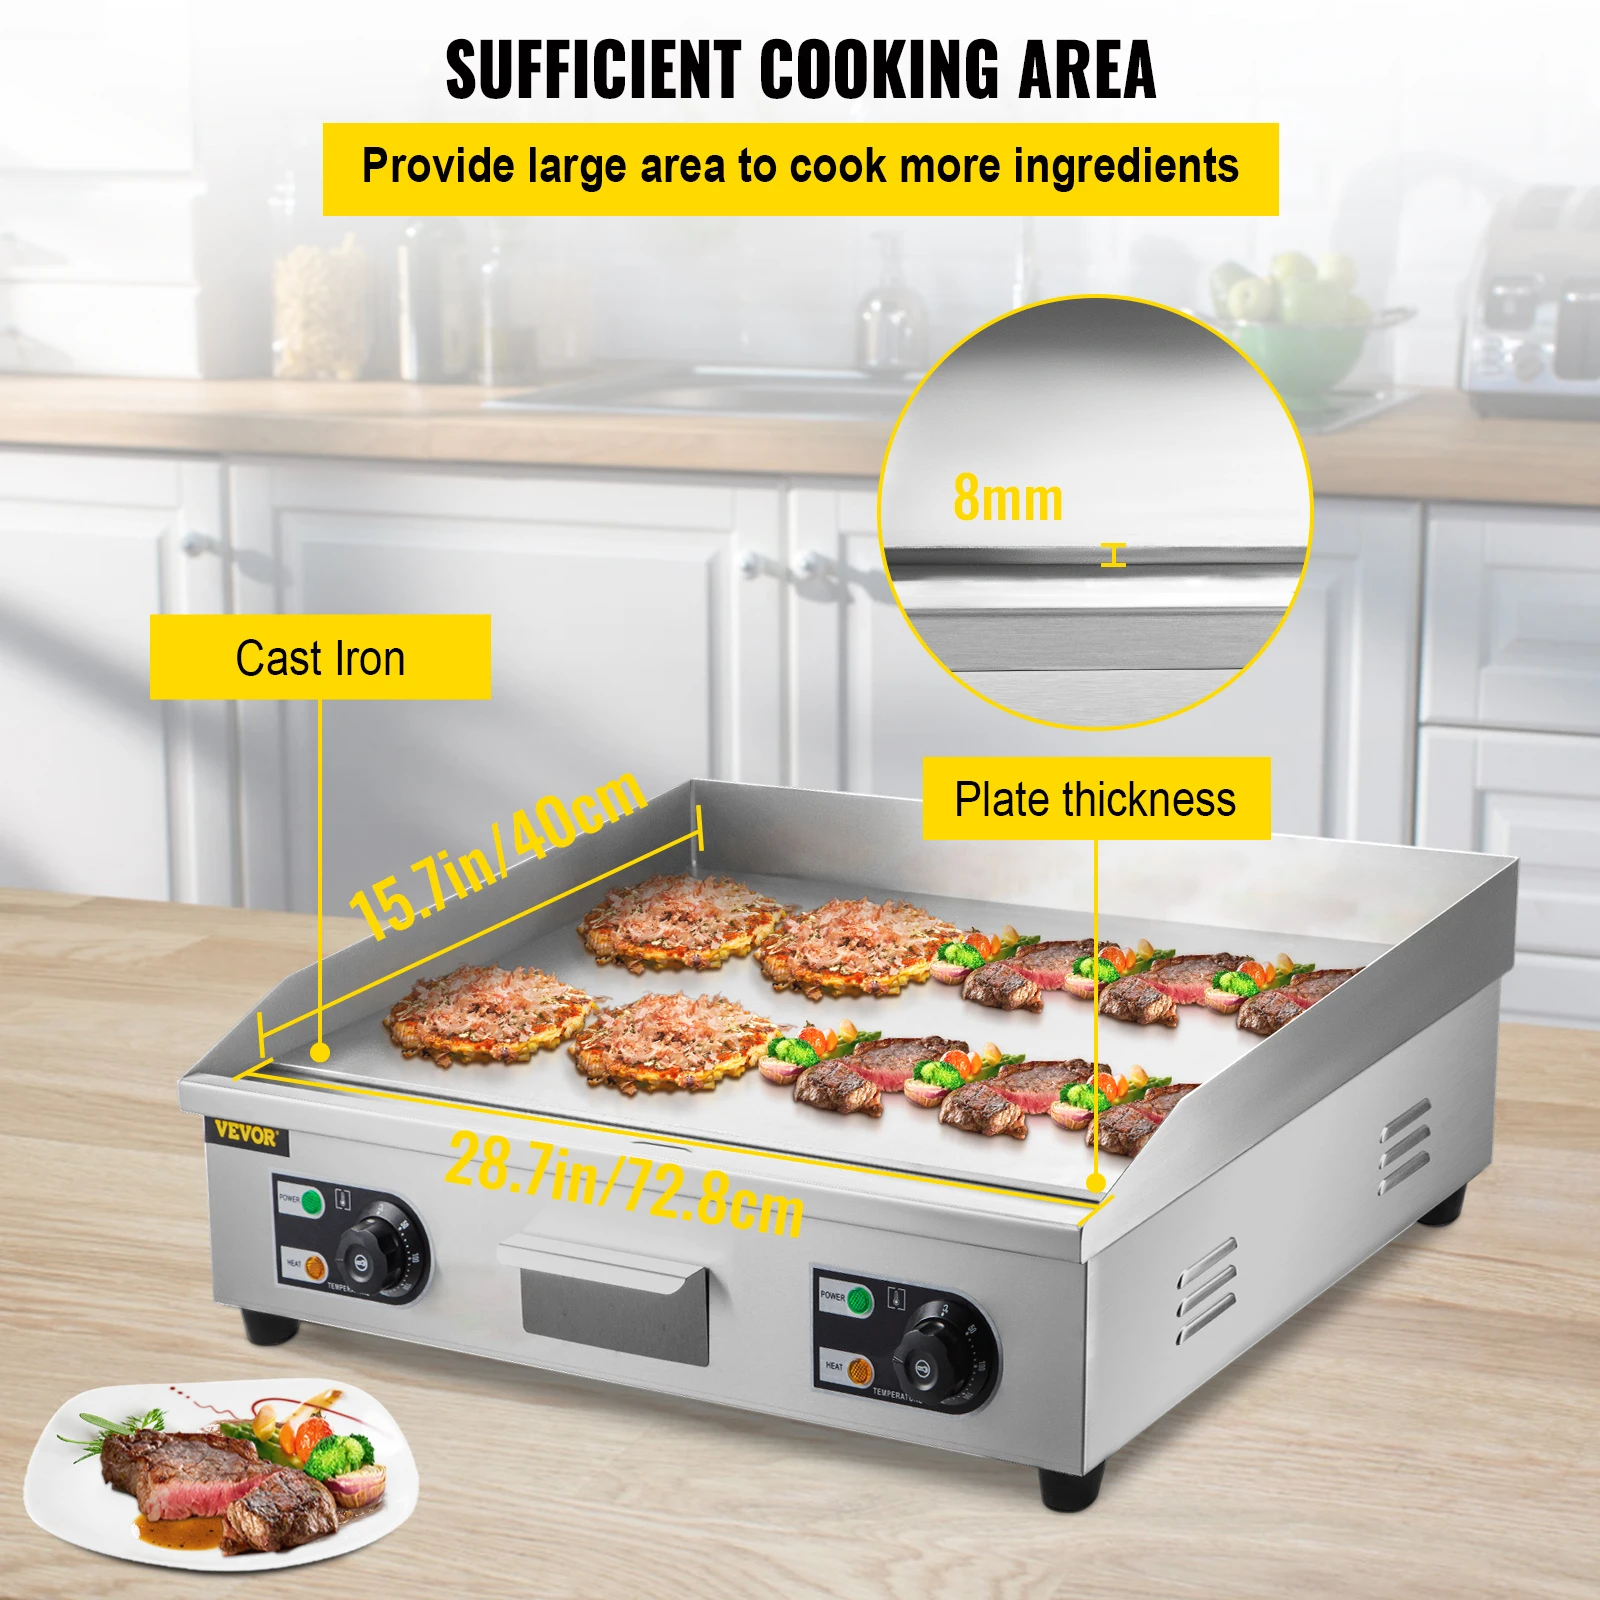 https://ae01.alicdn.com/kf/Sac3a71c8881e4db69f4d166778bf2affg/VEVOR-Electric-Countertop-Griddle-with-Drawer-Stainless-Steel-Flat-Top-Grill-Barbecue-BBQ-machine-for-Outdoor.jpg